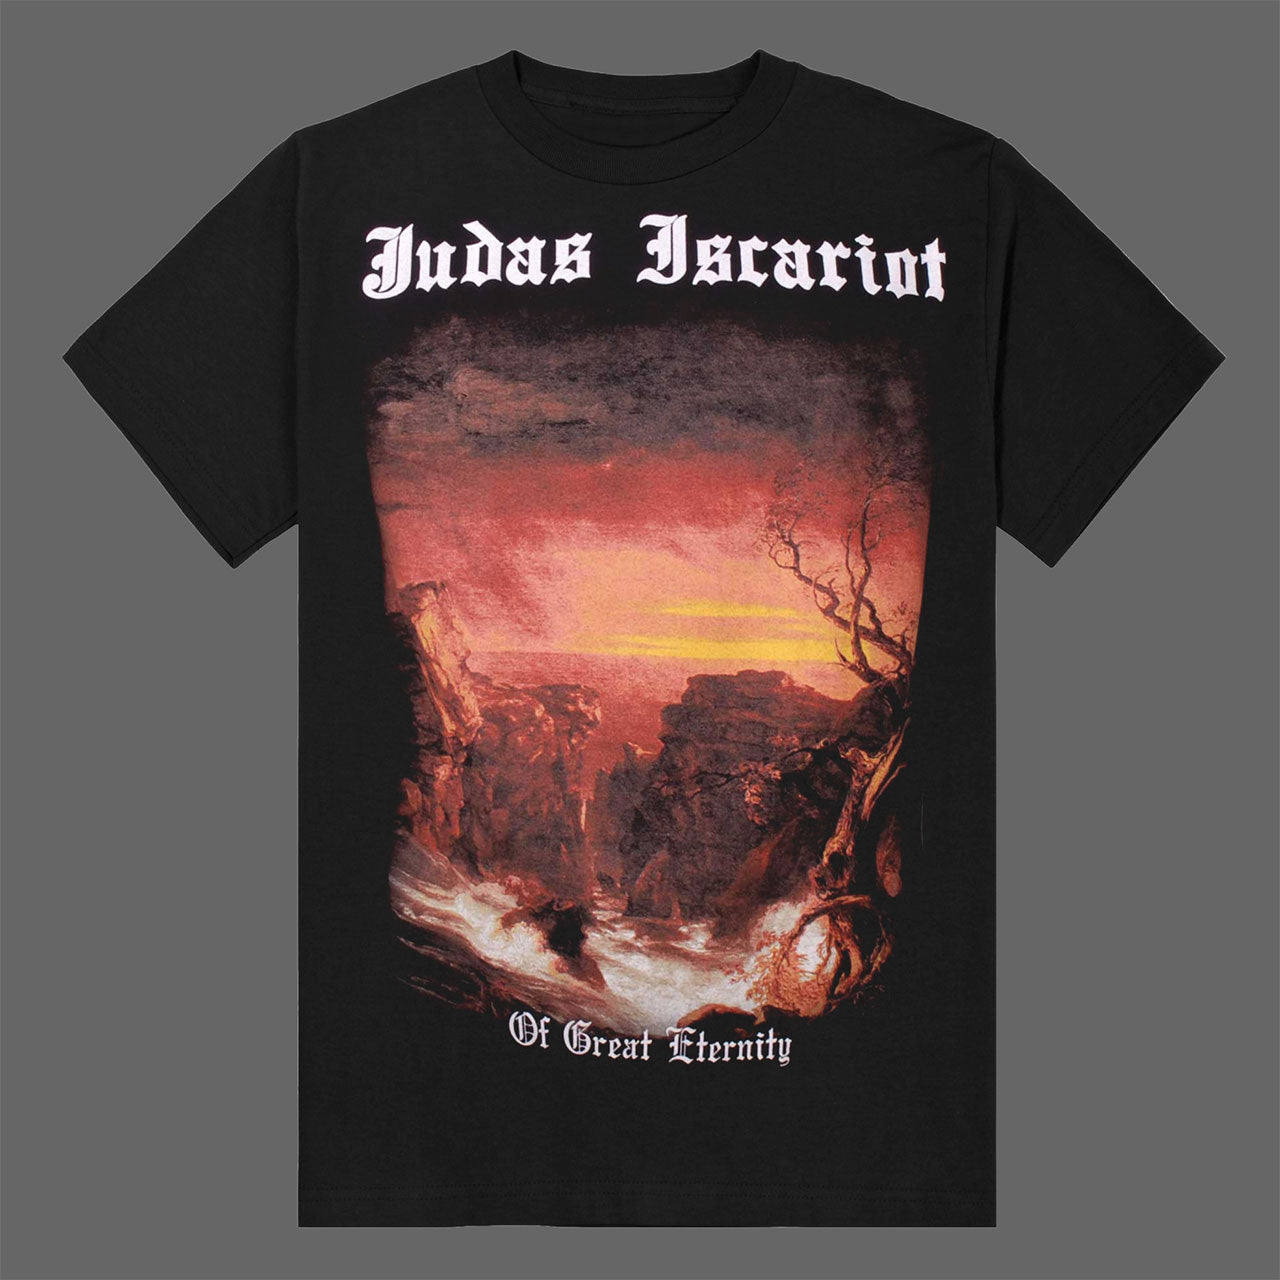 Judas Iscariot - Of Great Eternity (T-Shirt)